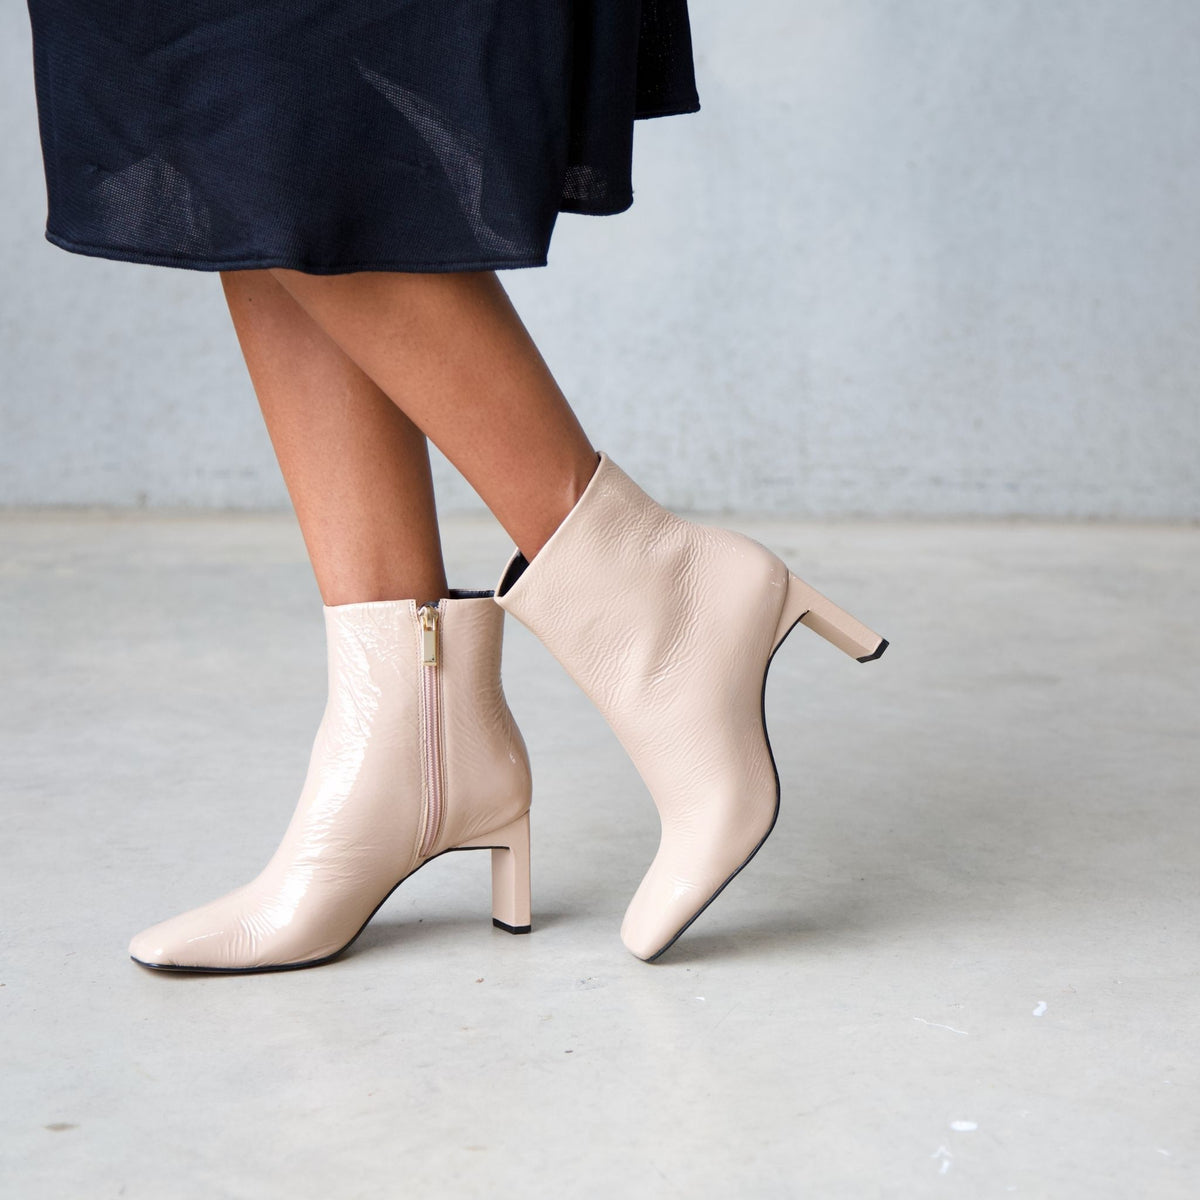 372007 Nude Patent High Heel Boots